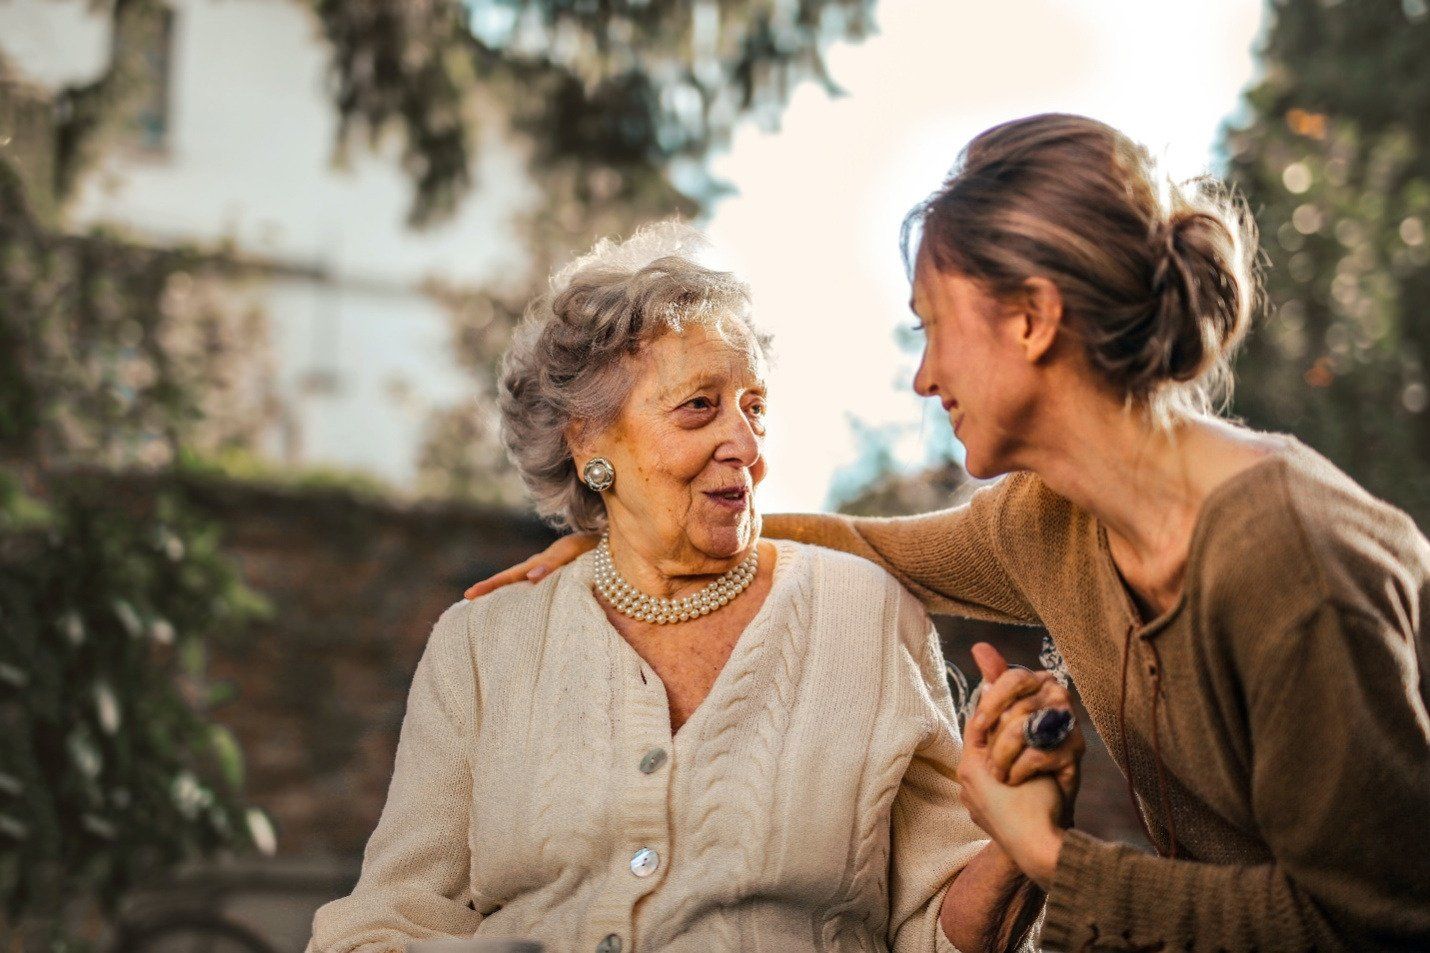 A young woman in a beige cardigan warmly greets an older woman outdoors, showcasing the joy and connection facilitated by senior care staff.